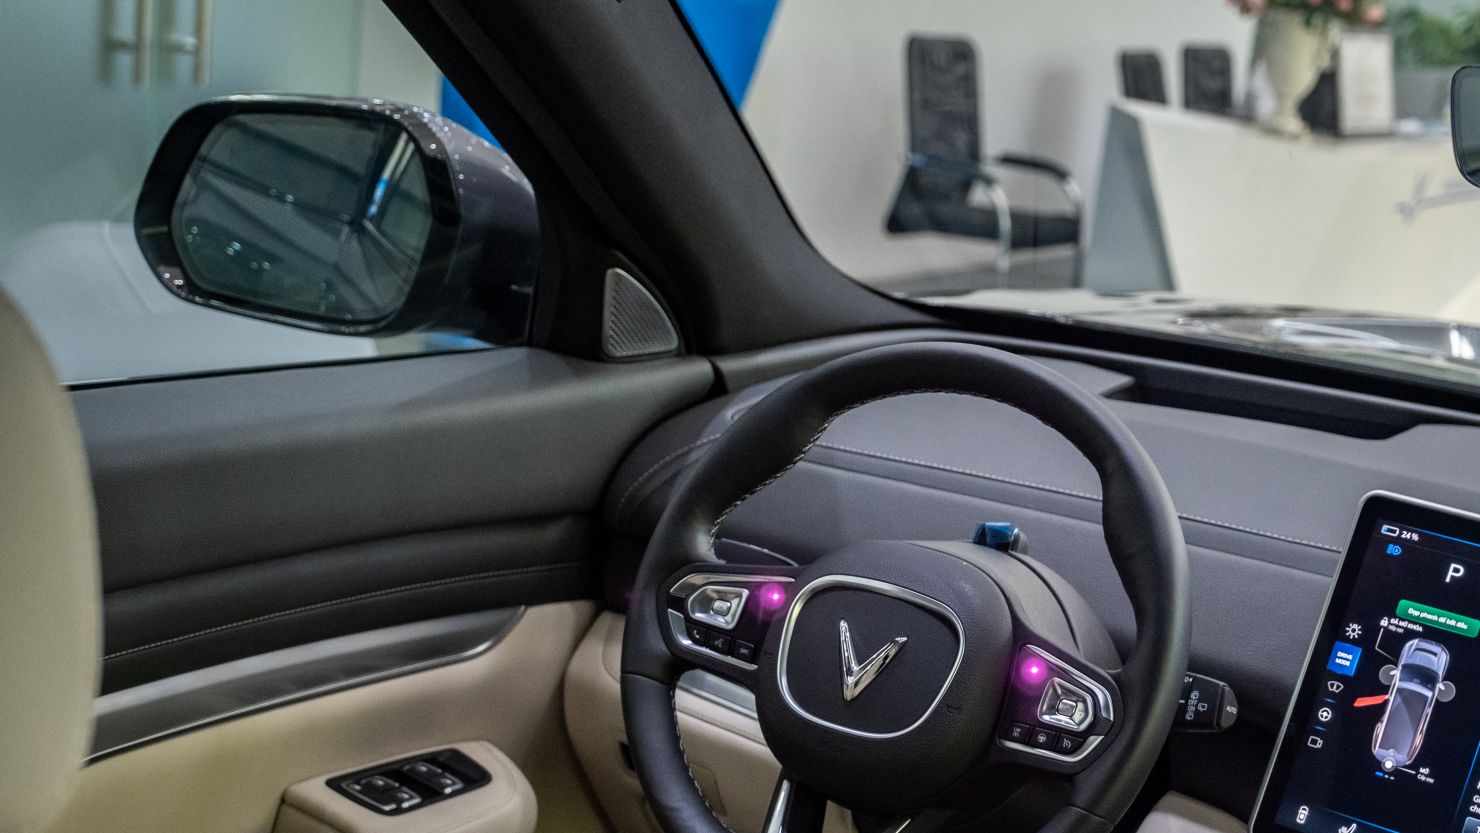 The steering wheel and the dashboard of VVinFast Auto Ltd. electric vehicle VF5 model on display inside the company's showroom in Hanoi, Vietnam, on Thursday, Sept. 7, 2023. VinFast is one of Vietnam's most high-profile companies, backed by the country's wealthiest man Pham Nhat Vuong  who has established Vingroup JSC, a conglomerate spanning homes, hotels, hospitals and shopping malls. The group, together with its affiliates and lenders, have deployed $8.2 billion to fund VinFast's operating expenses and capital expenditures the last six years. Photographer: Linh Pham/Bloomberg via Getty Images